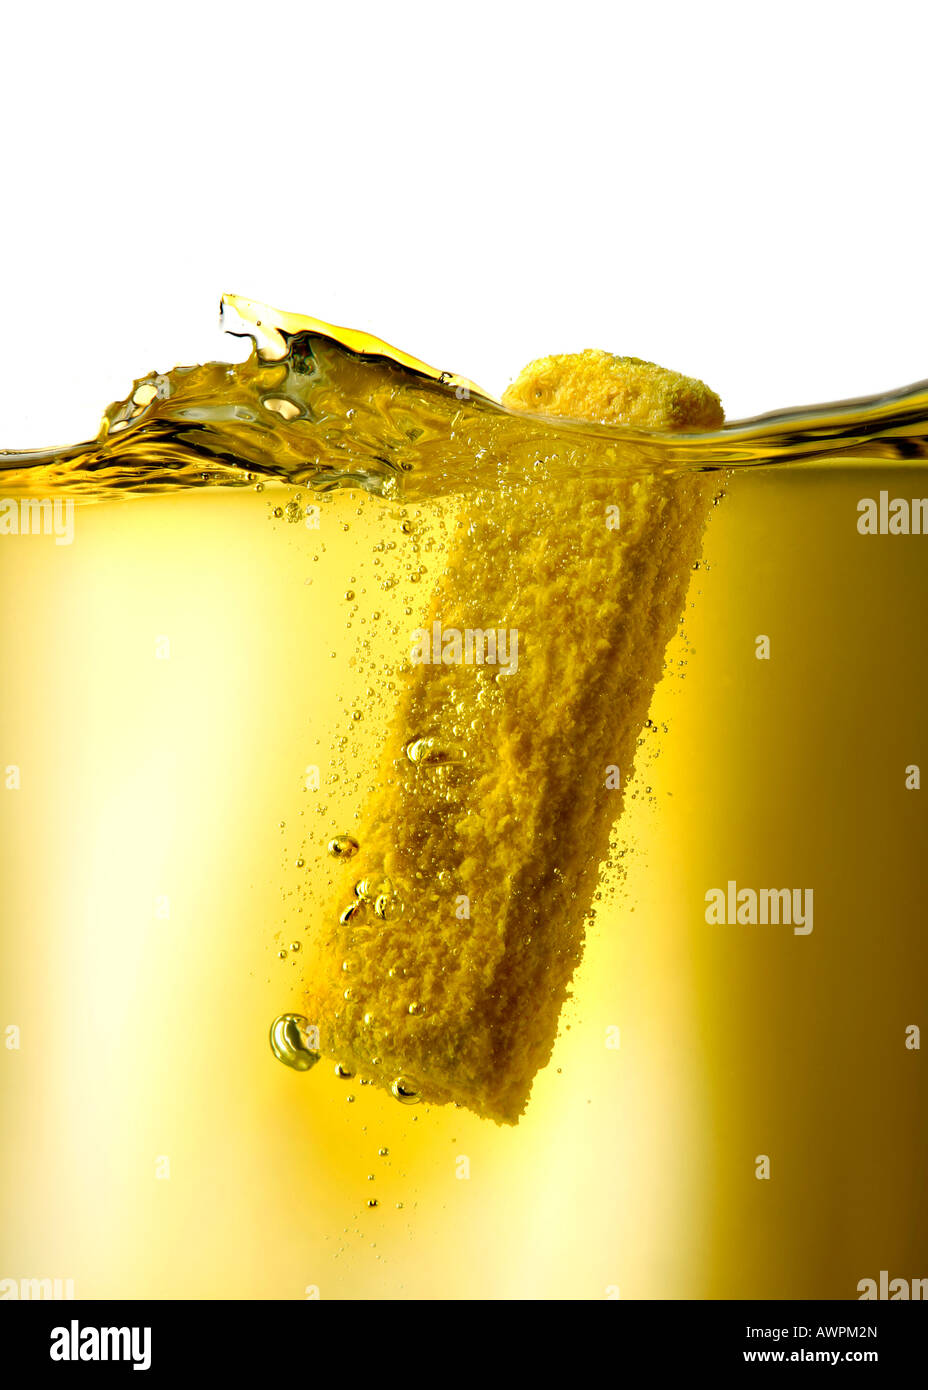 Fishstick (fishfinger) falling into cooking oil Stock Photo